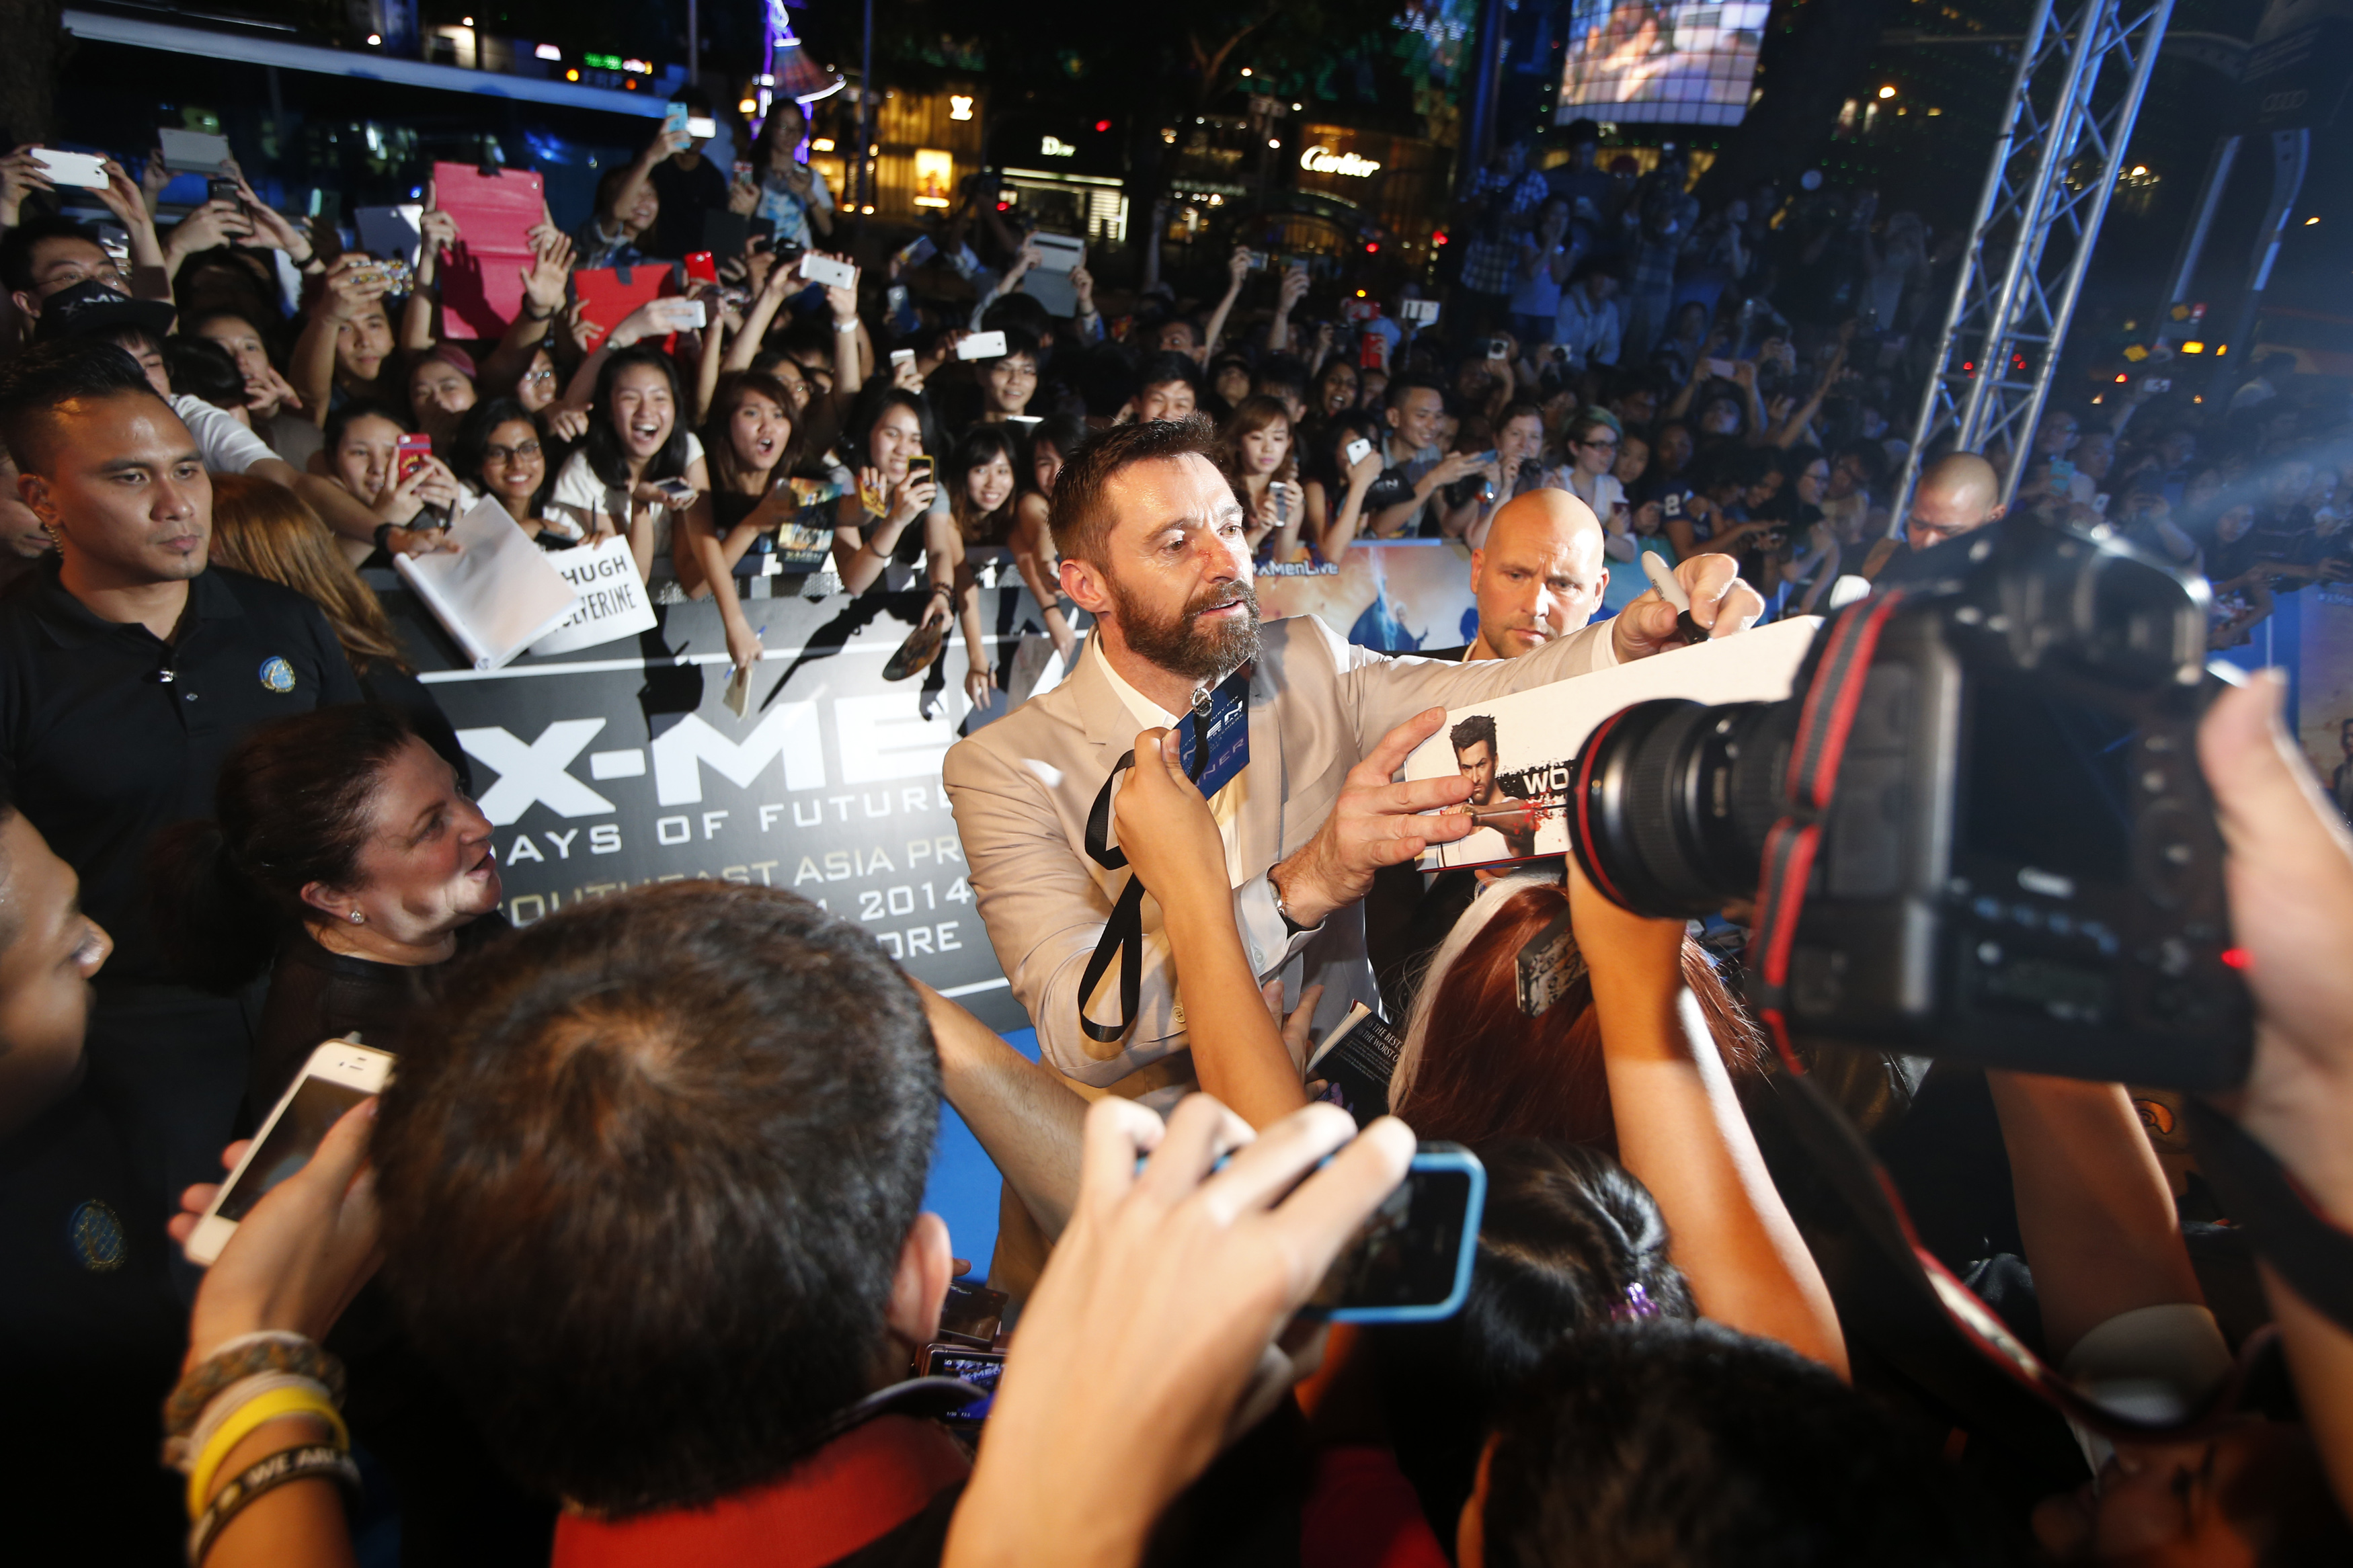 Cast member Hugh Jackman signs autographs for fans at the South East Asia premiere of X-Men: Days Of Future Past in Singapore